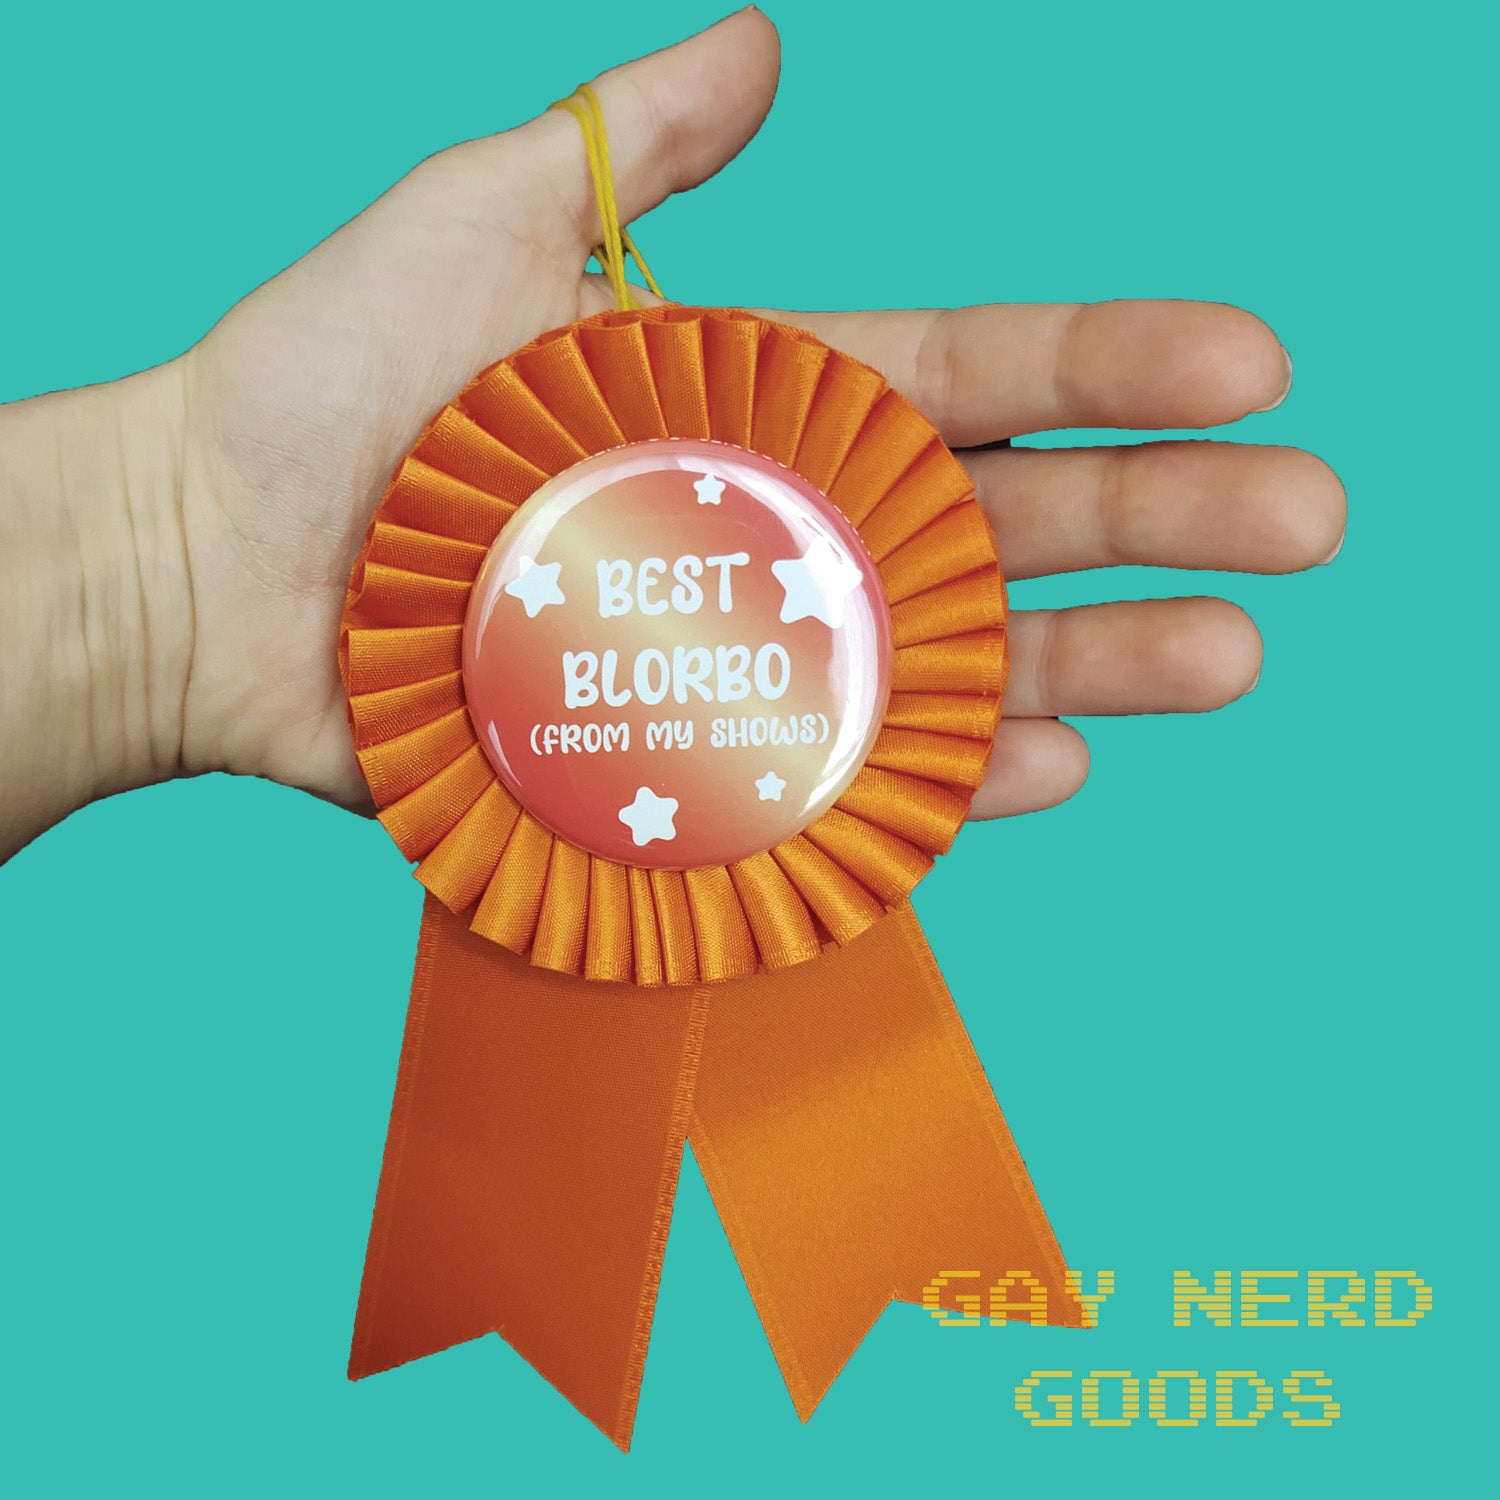 best blorbo orange satin award ribbon held in a hand on a mint green background